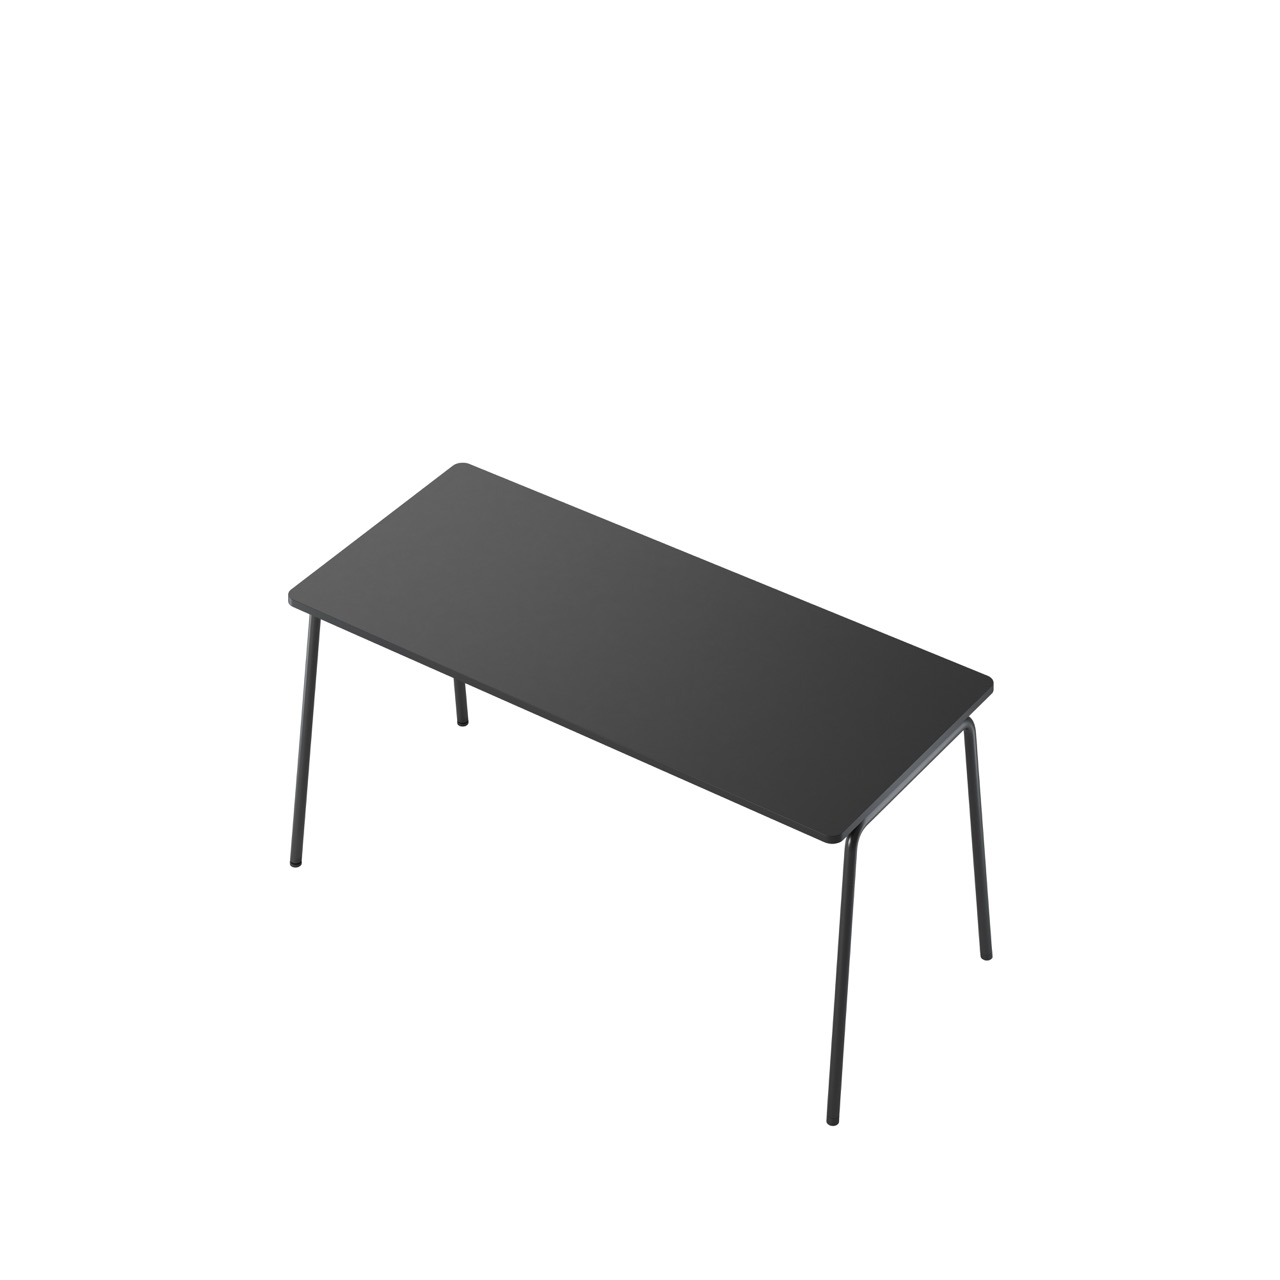 OCEE&FOUR - Tables - FourReal 74 - 180 x 80 - Angled - Packshot Image 1 Large